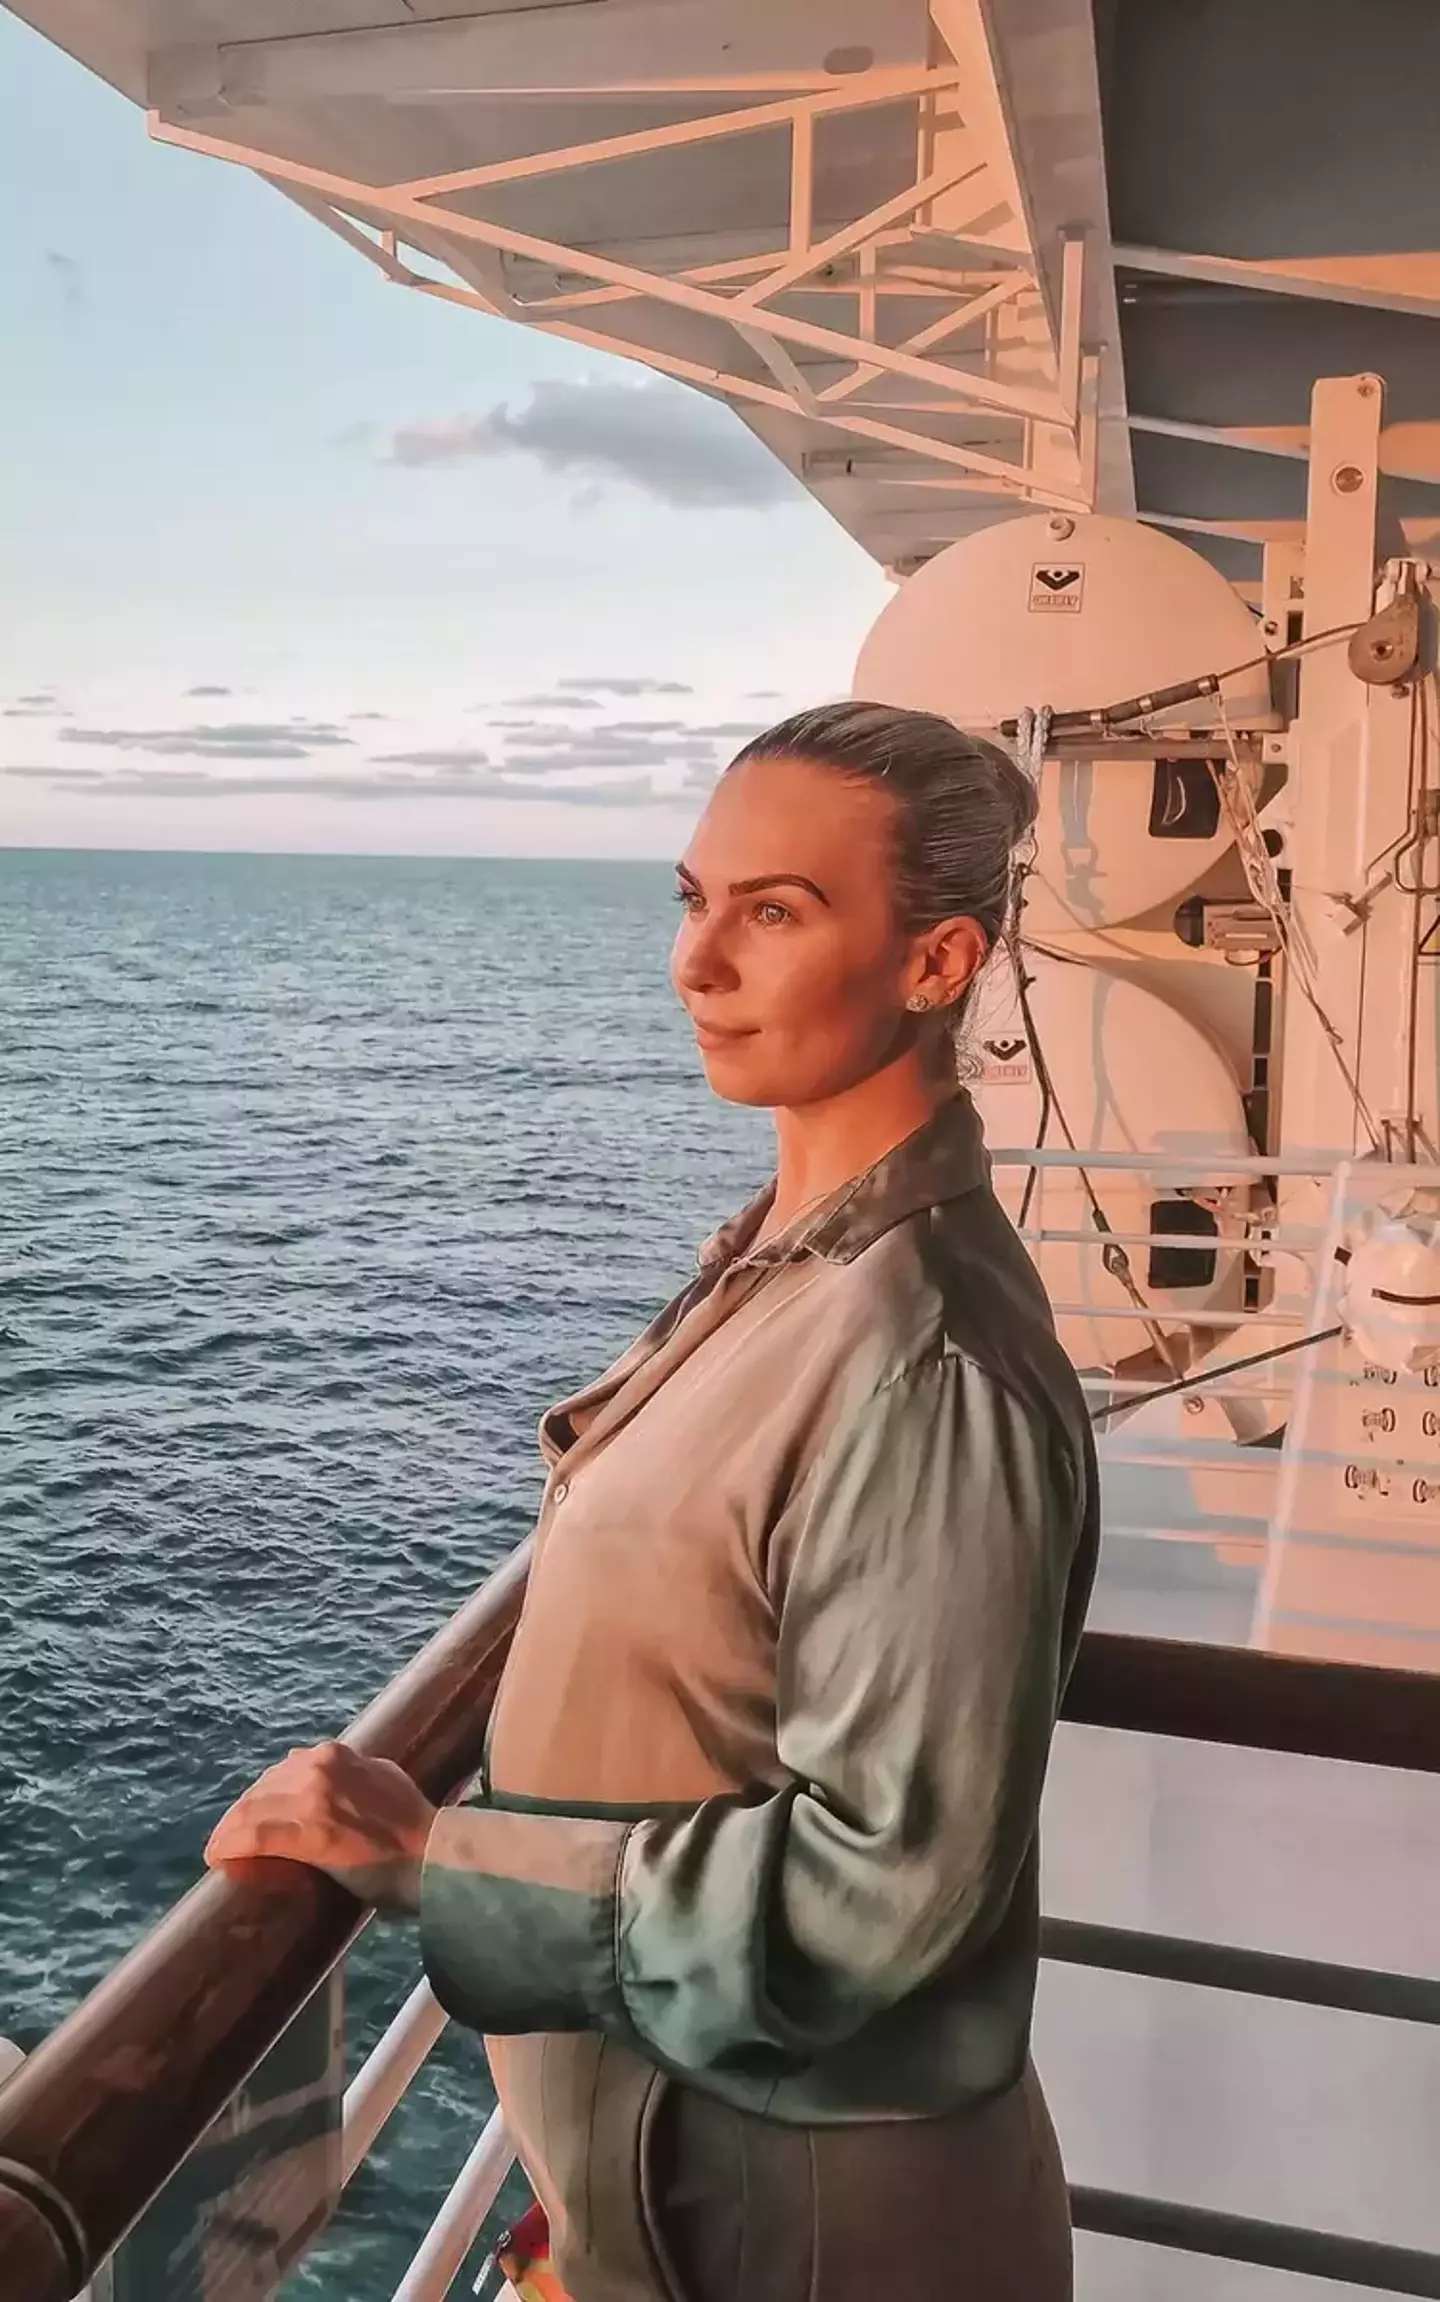 Lucy Sotherton, from Birmingham, has been working on cruise ships for nine years.